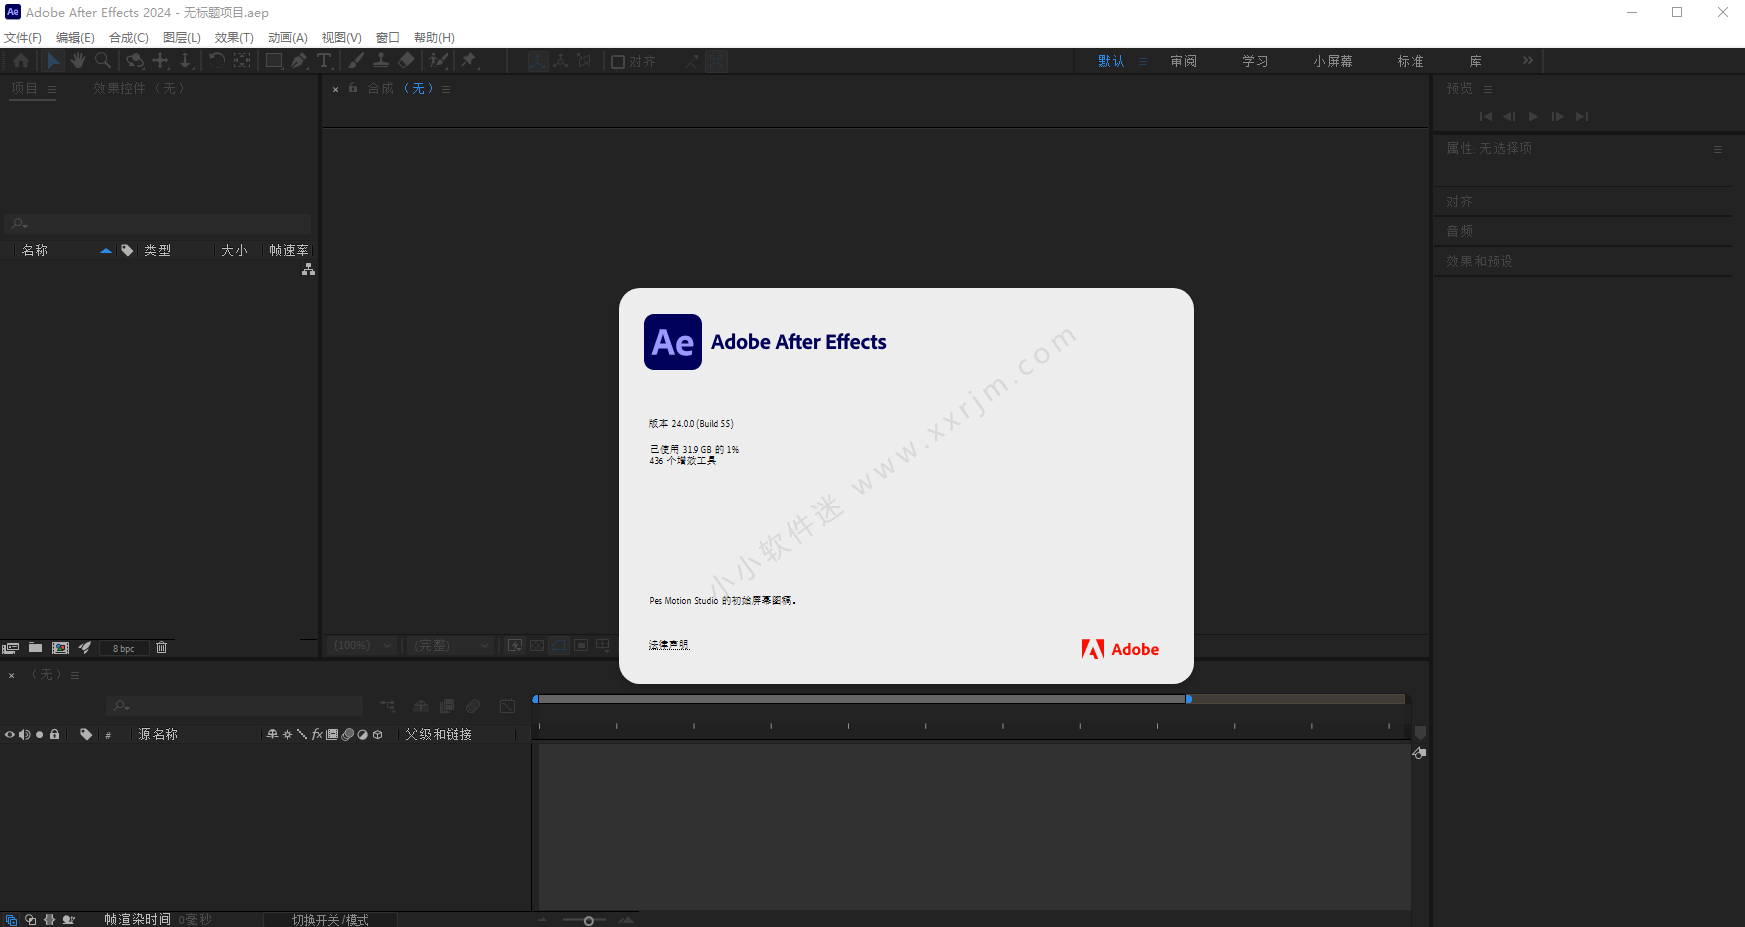 Adobe After Effects 2024 v24.0.0.55 for windows instal free